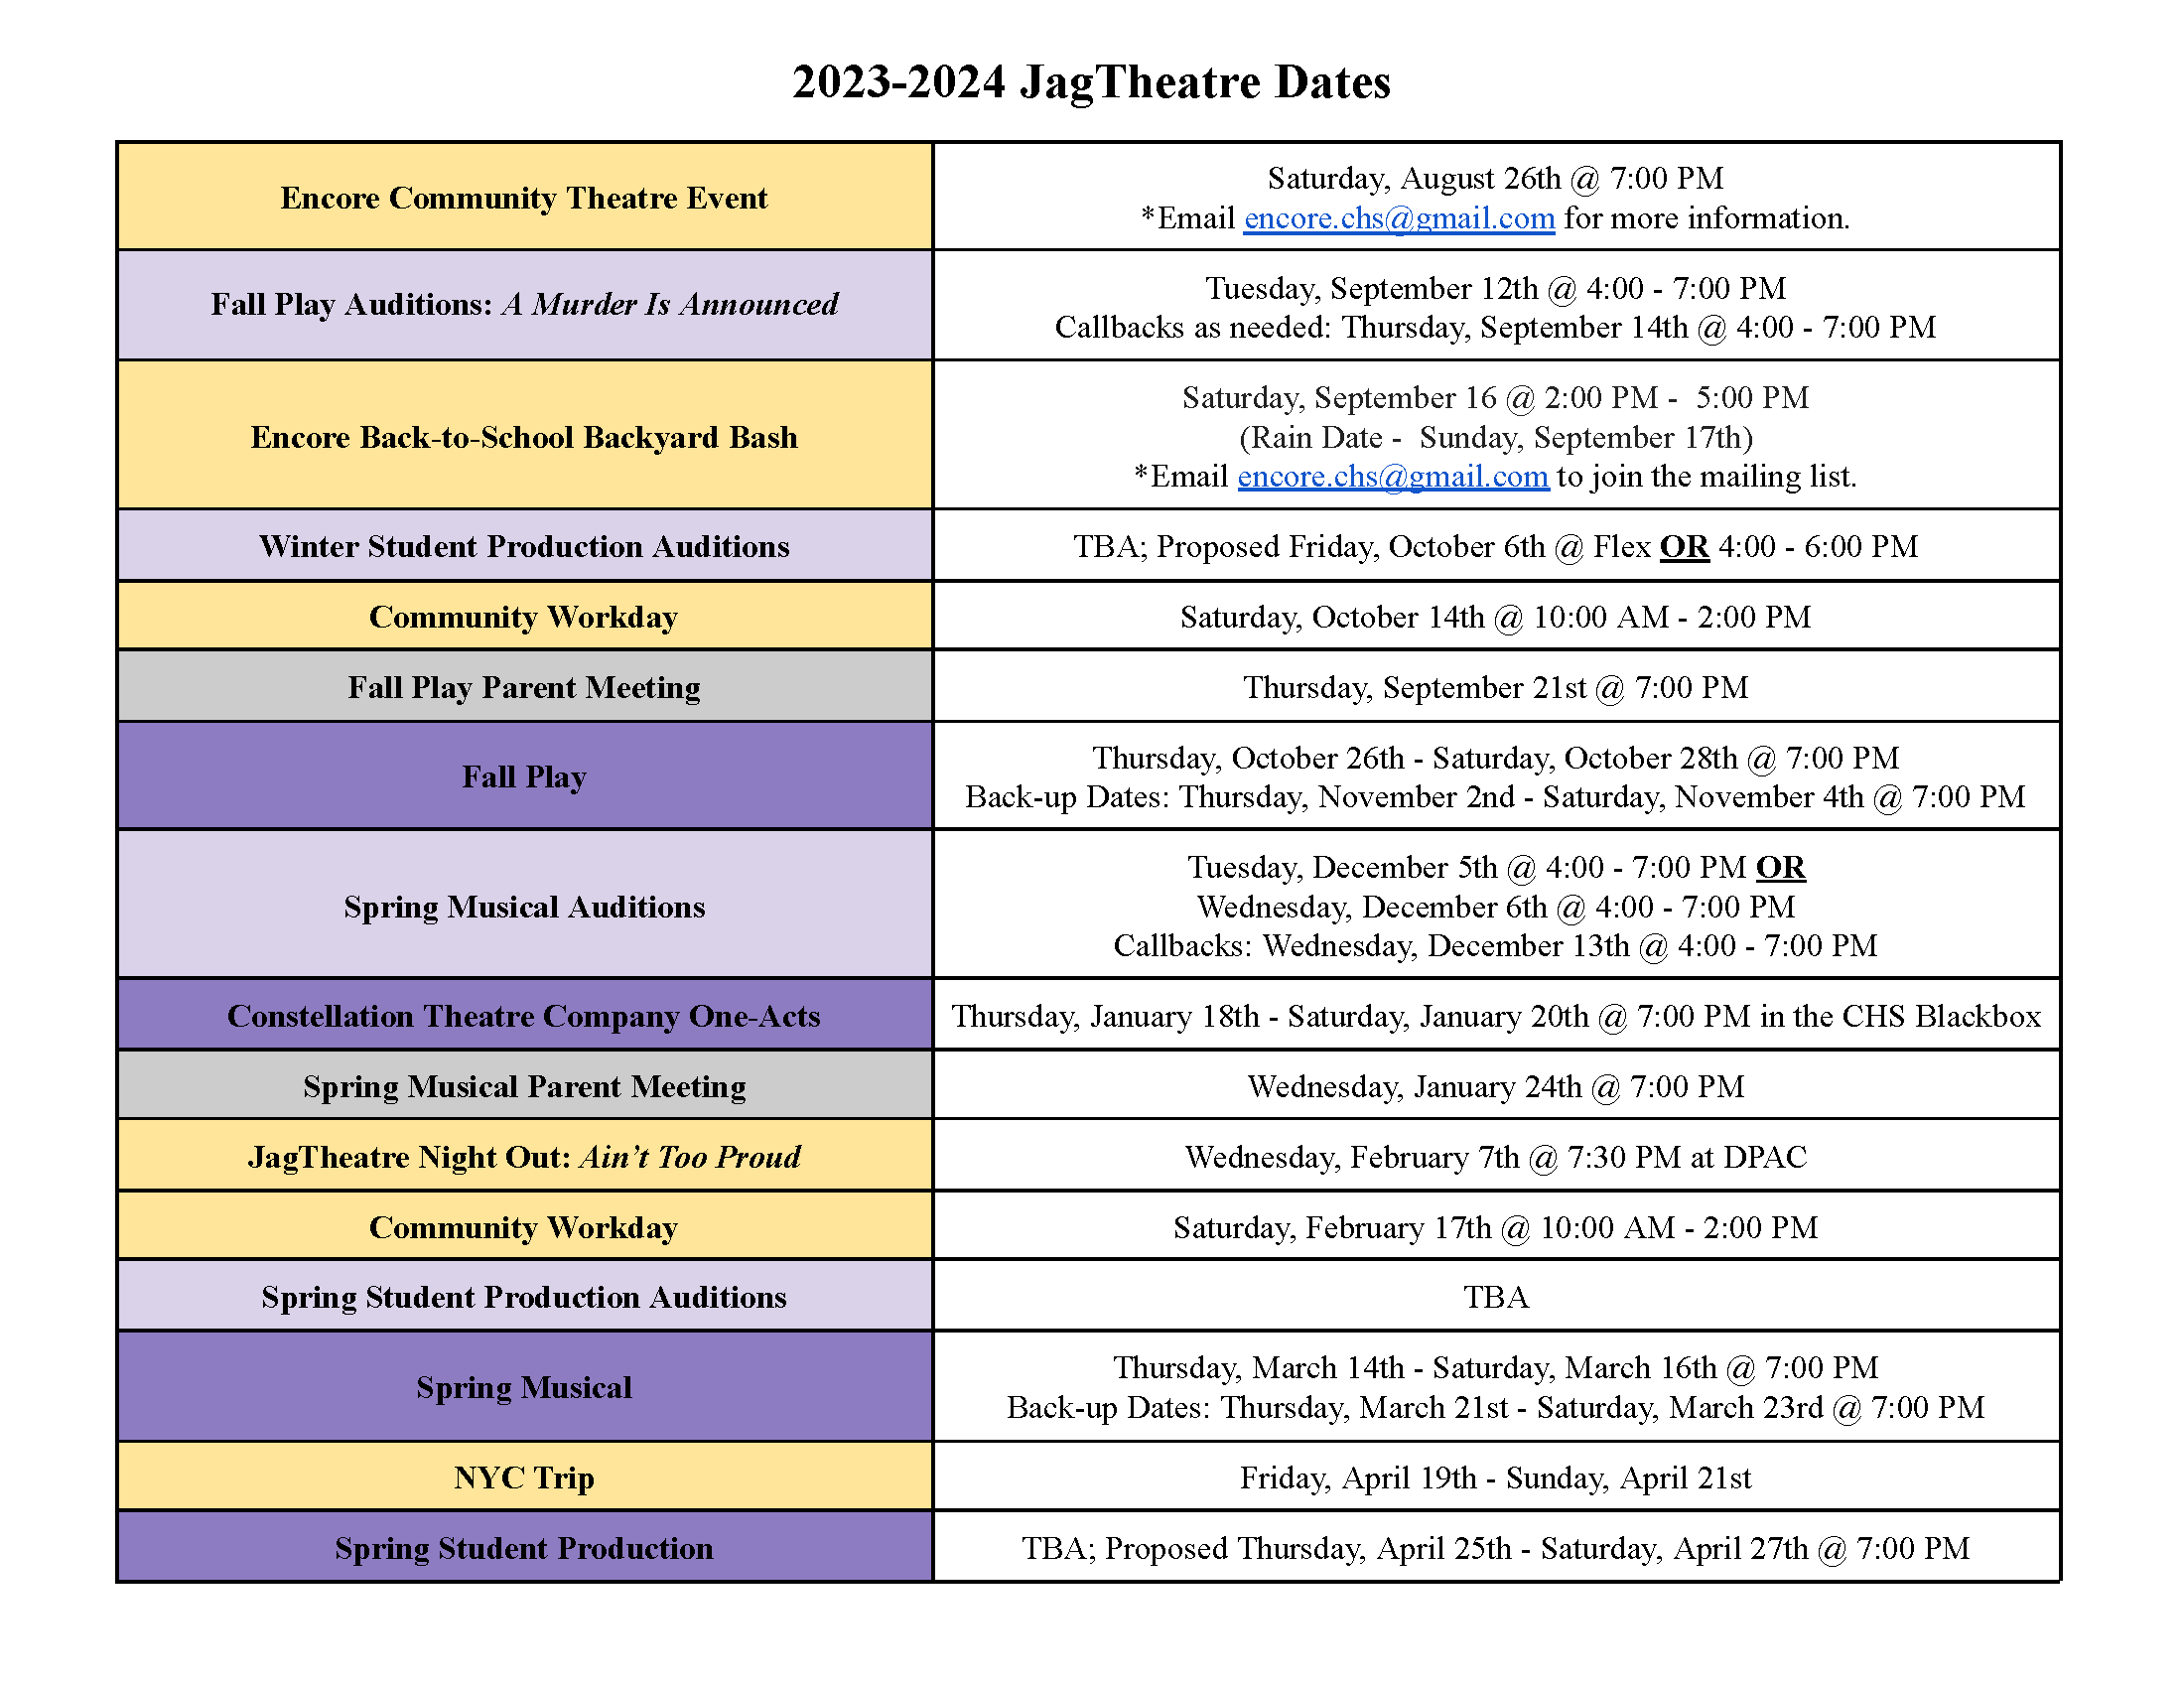 2023-2024 JagTheatre Dates_Page_1